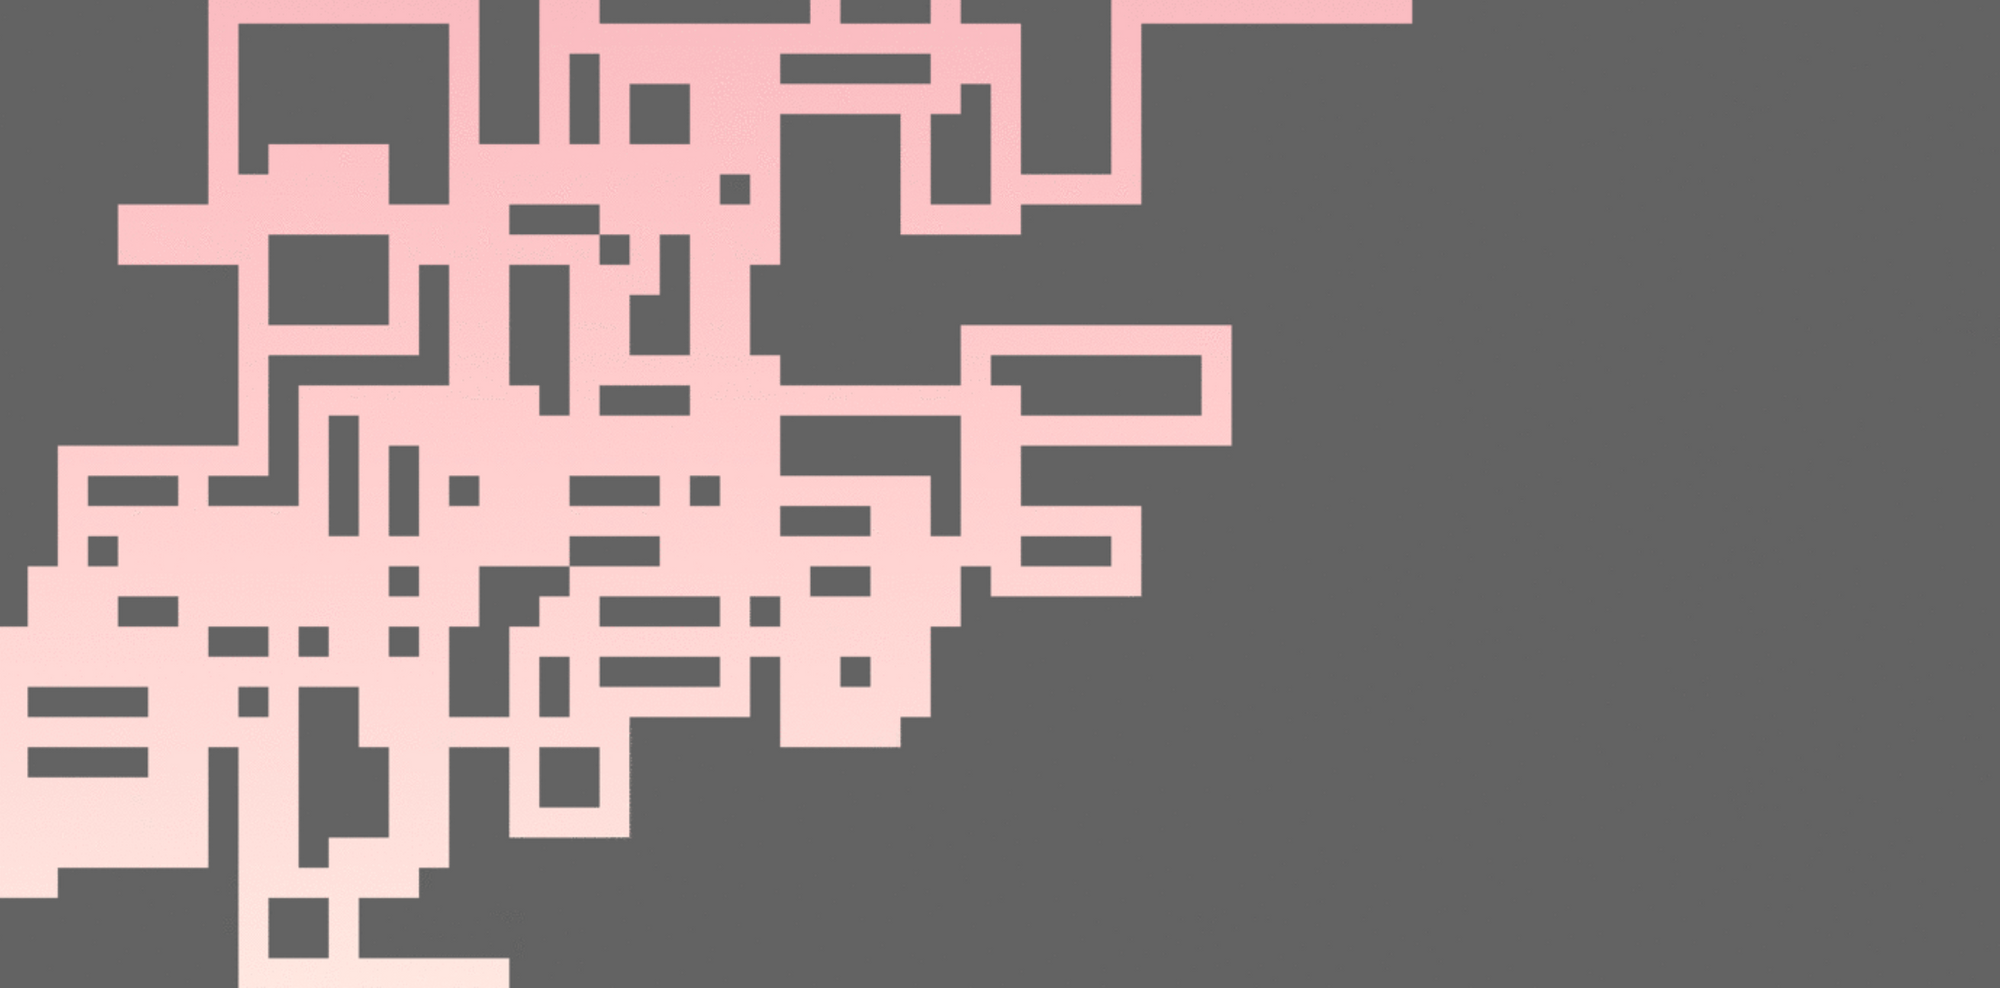 How to code your own procedural dungeon map generator using the Random Walk